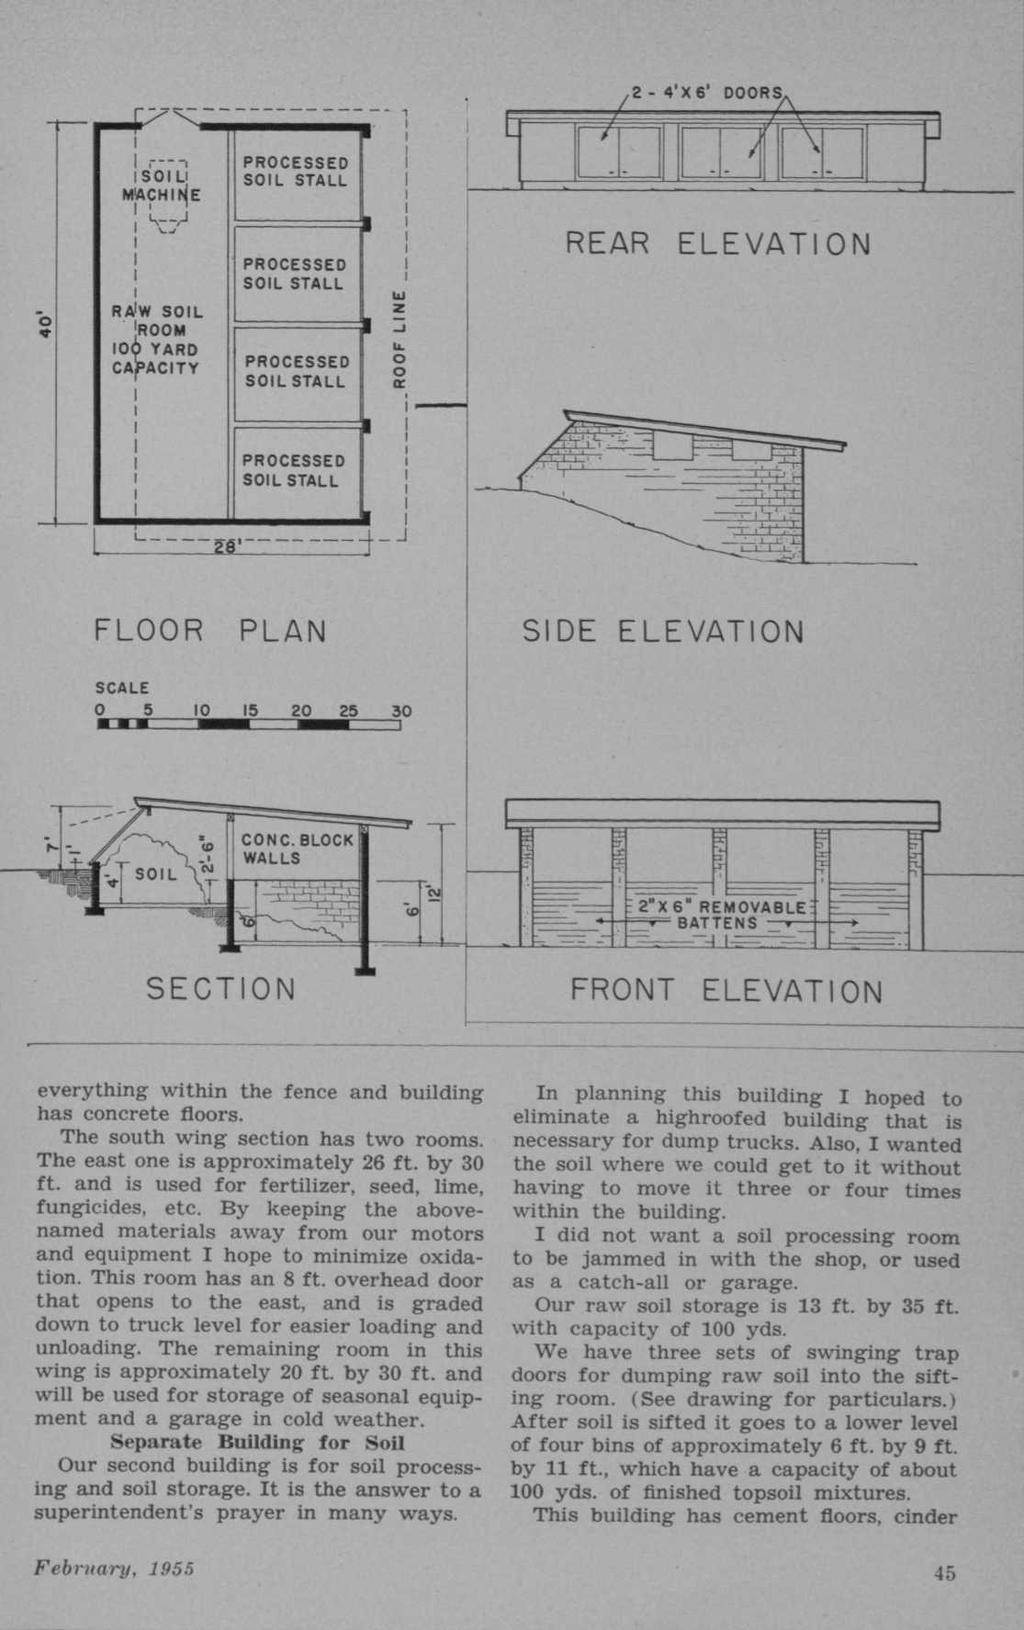 FLOOR PLAN SIDE ELEVATION SECTION FRONT ELEVATION everything within the fence and building has concrete floors. The south wing section has two rooms. The east one is approximately 26 ft. by 30 ft.